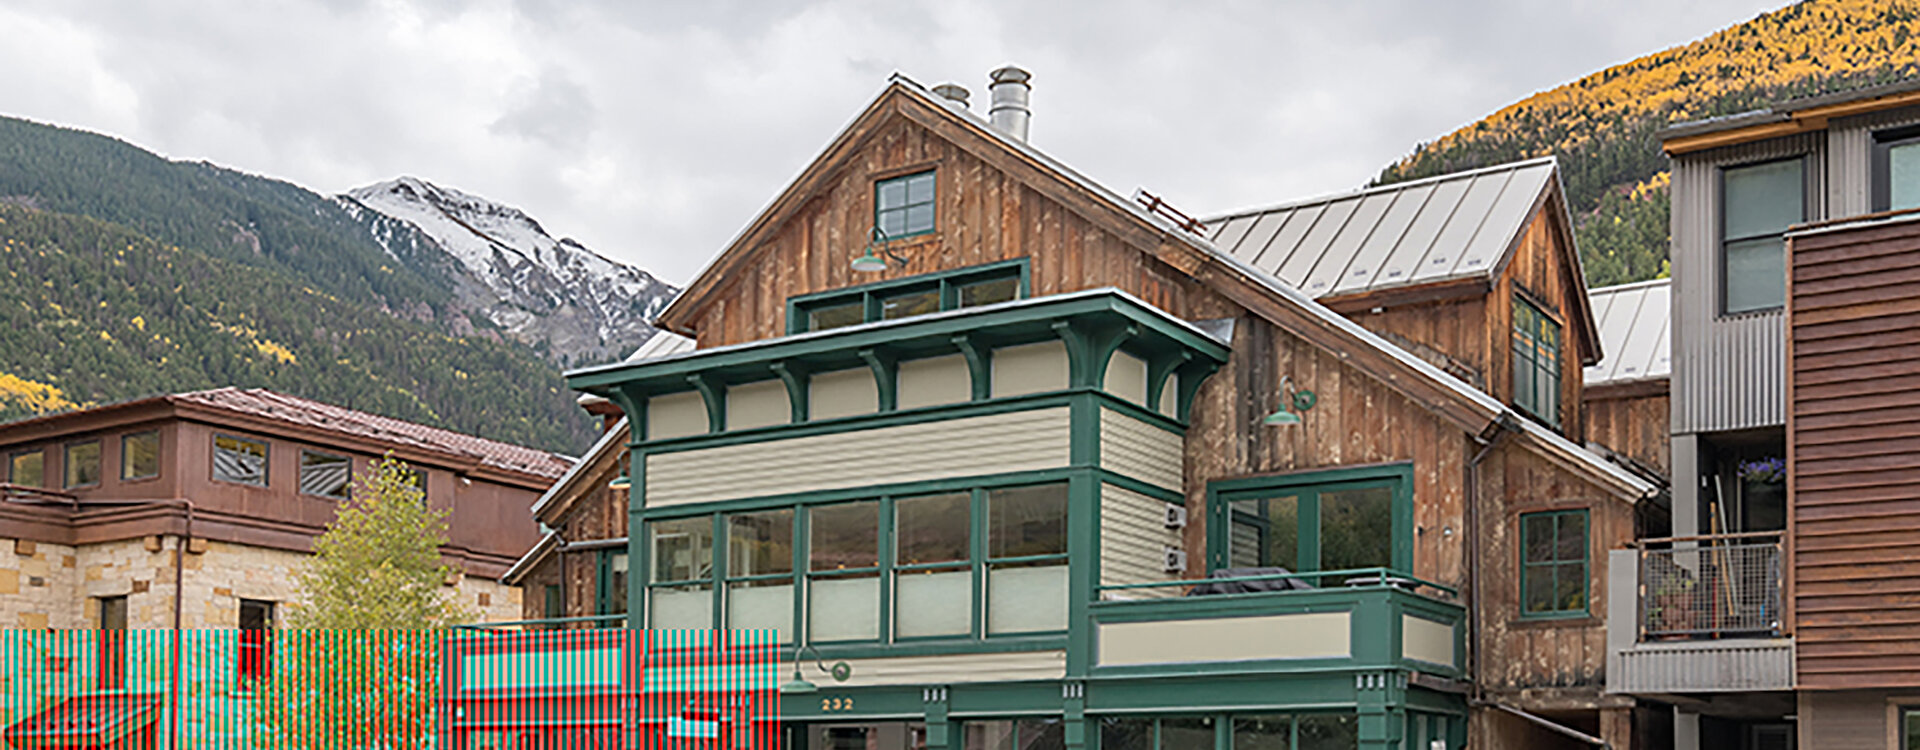 15-Telluride-Pacific-Place-Too-Front-Exterior-Inntopia-Web